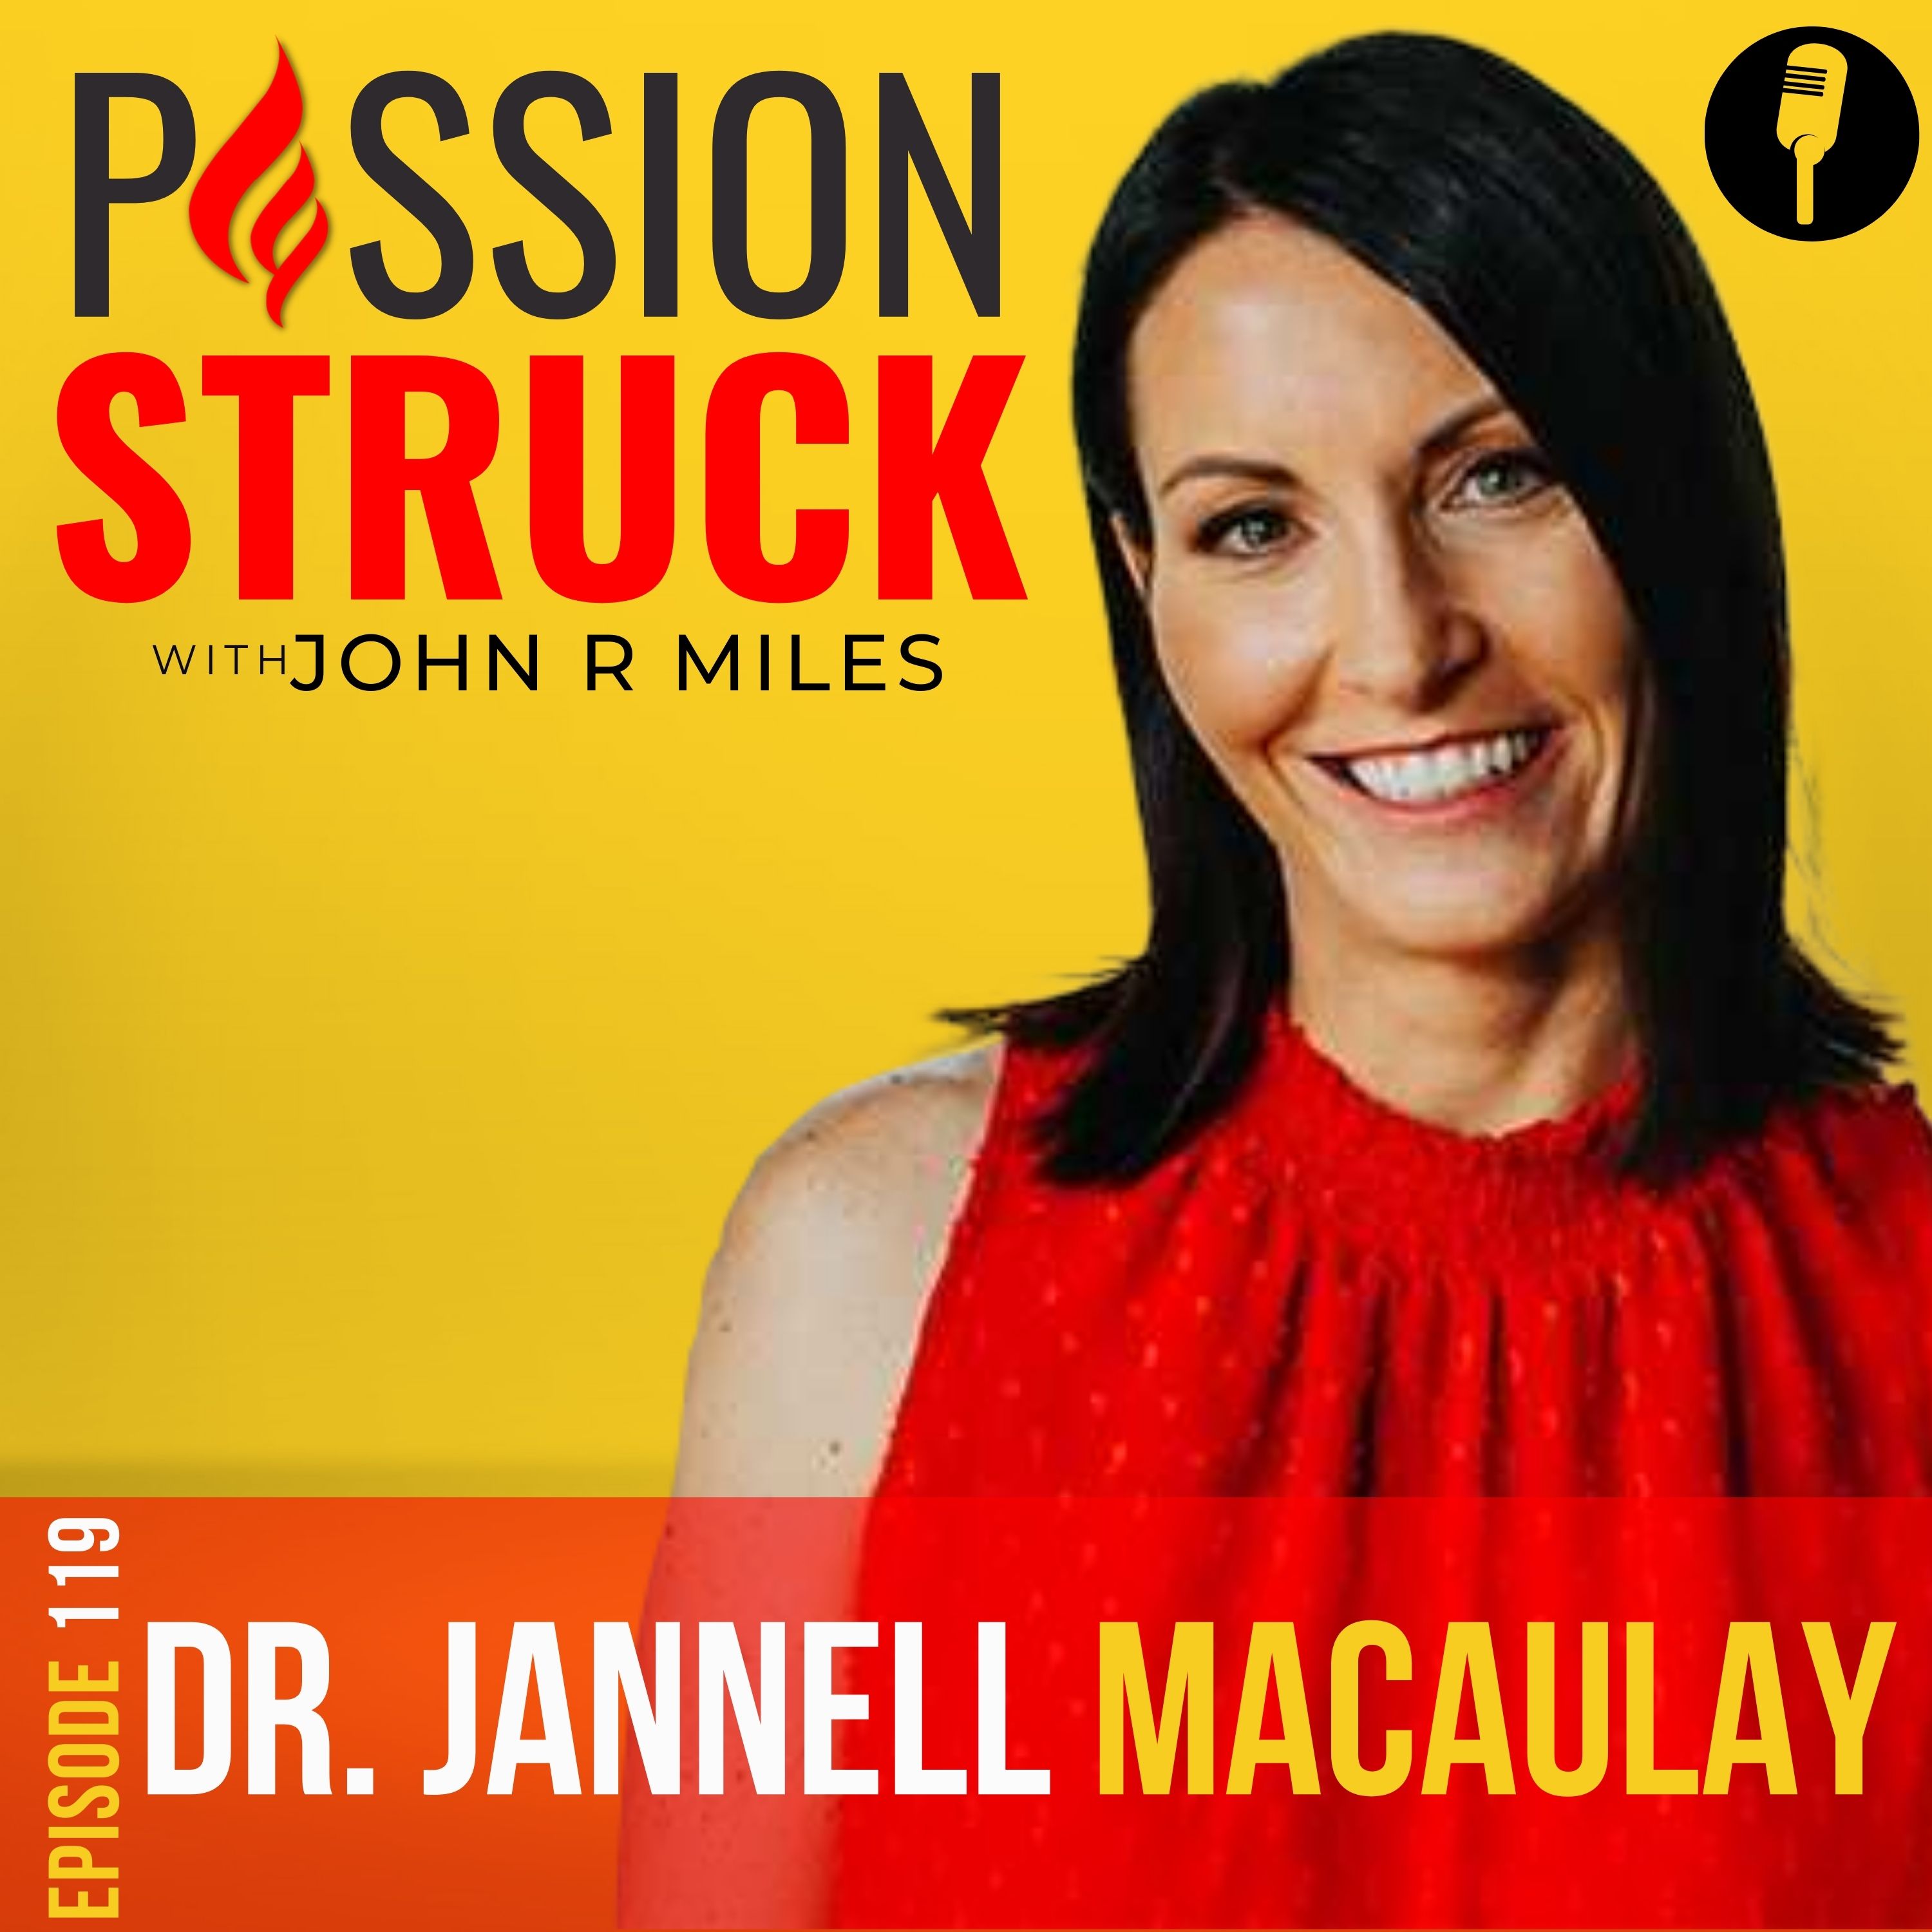 Passion Struck with John R. Miles album cover for episode 119 with Dr. Jannell MacAulay